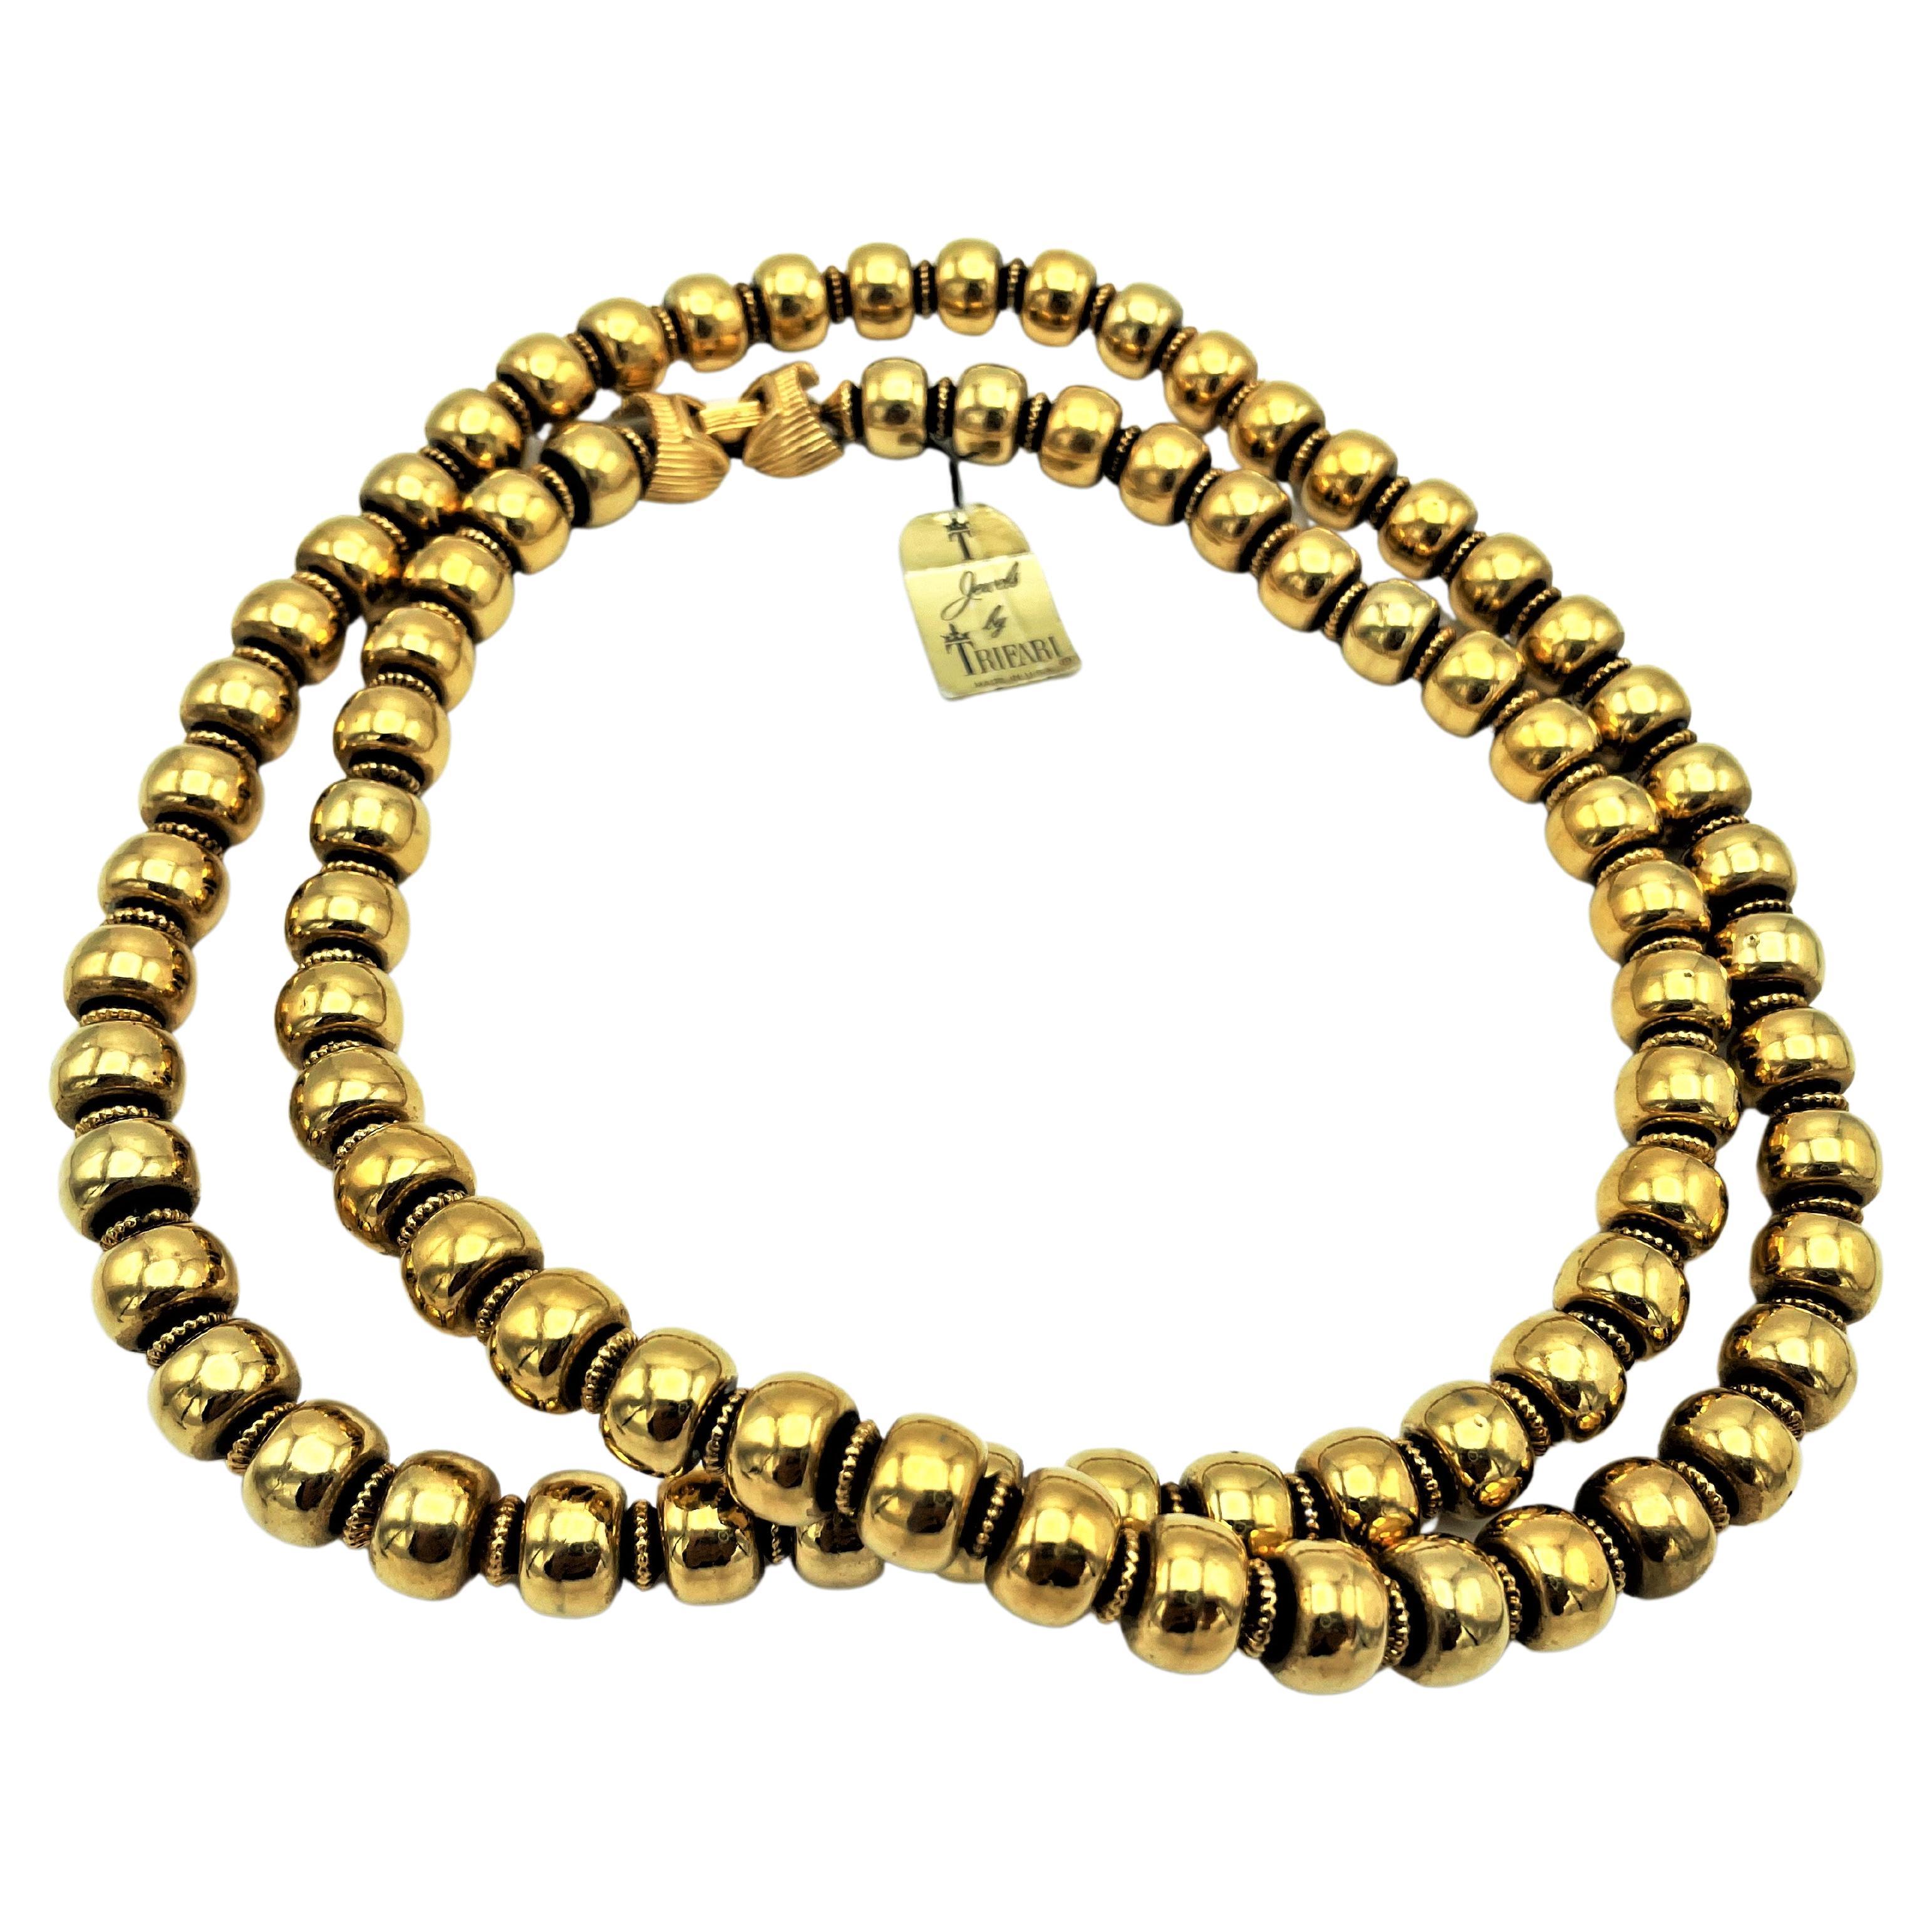 Vintage long necklace 'Jewel by TRIFARI' tag,  never worn, gold plated, 1950s US